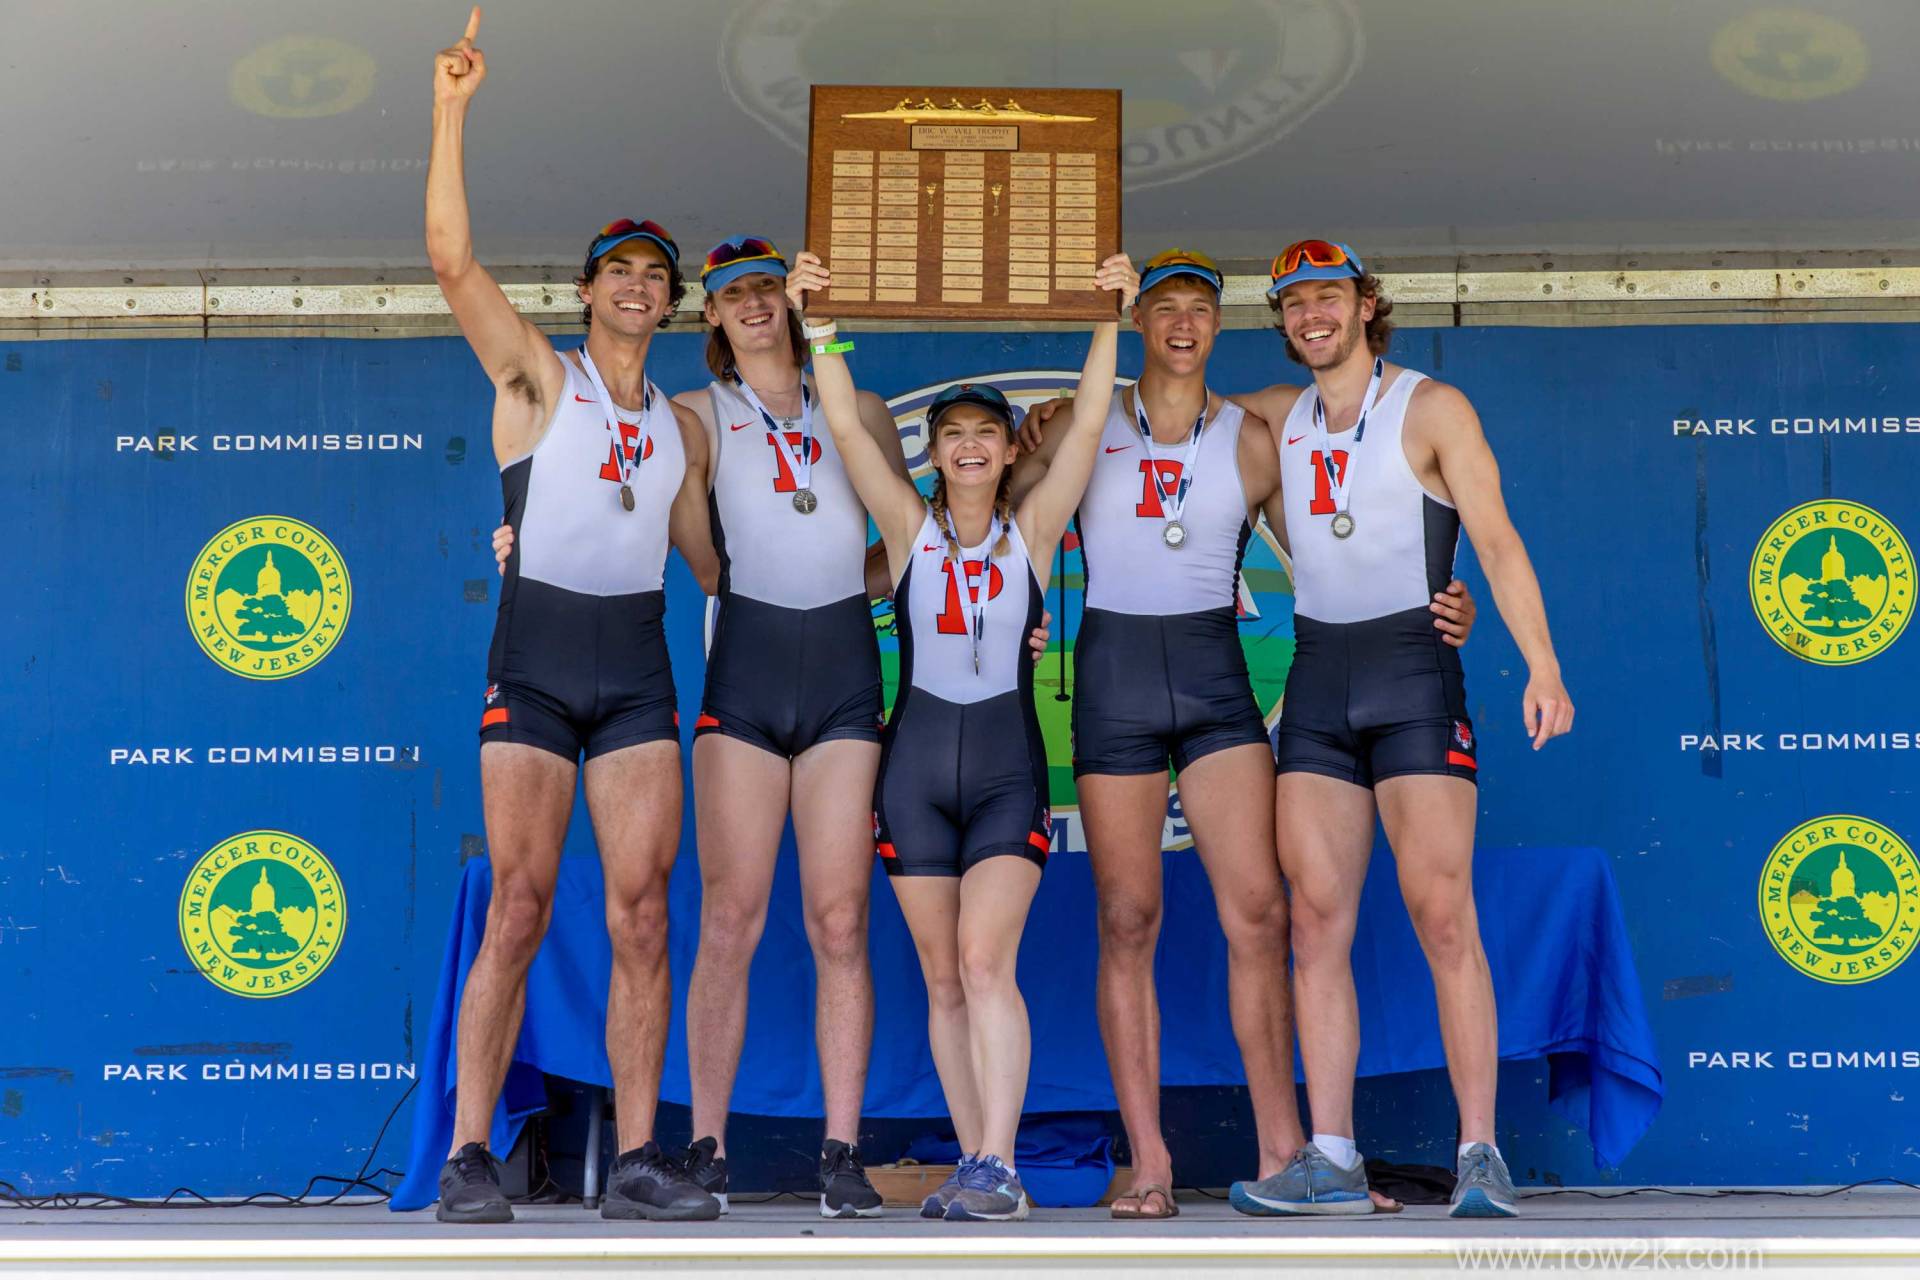 5 person rowing team at the podium